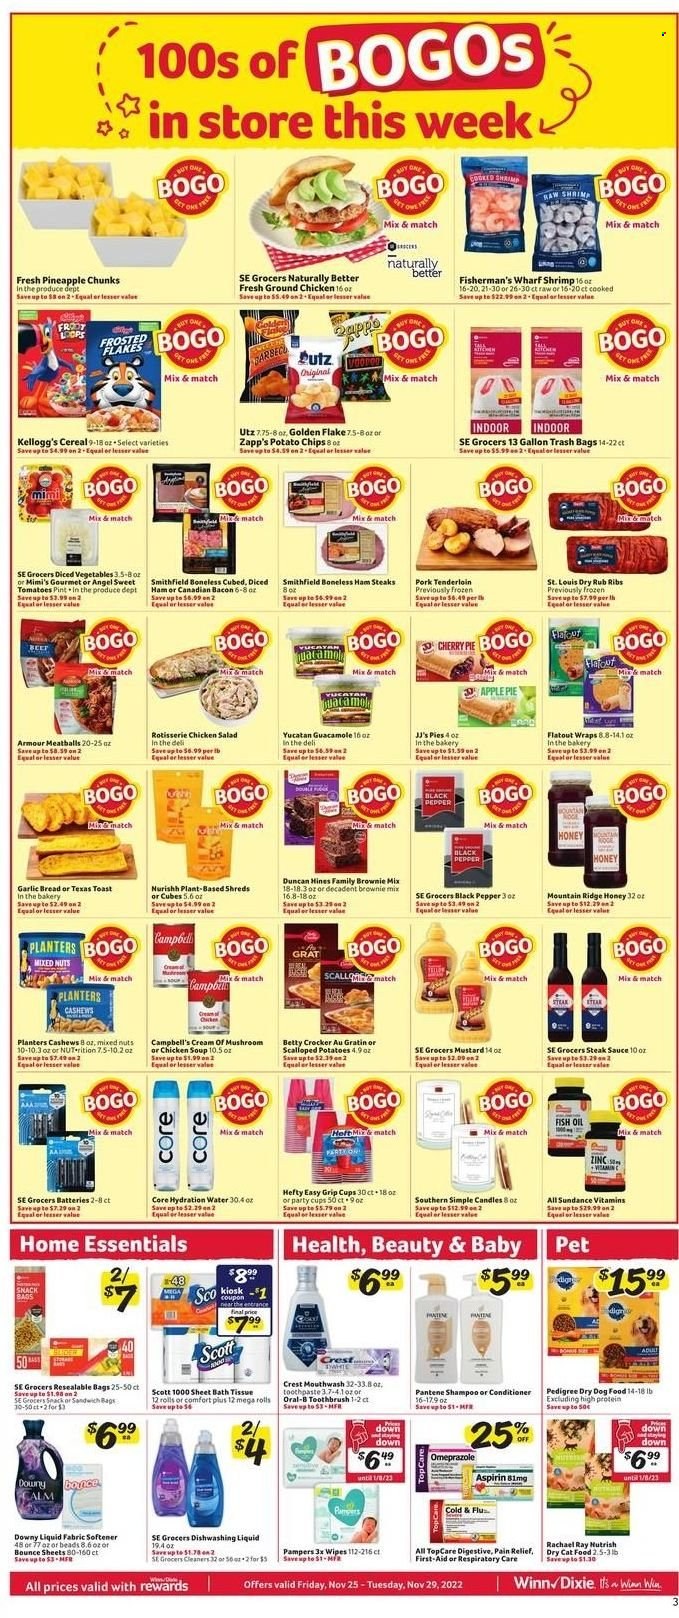 thumbnail - Winn Dixie Flyer - 11/25/2022 - 11/29/2022 - Sales products - bread, wraps, apple pie, cherry pie, brownie mix, tomatoes, pineapple, shrimps, Campbell's, chicken roast, chicken soup, meatballs, soup, sauce, bacon, canadian bacon, ham, guacamole, chicken salad, ham steaks, Kellogg's, potato chips, cereals, black pepper, mustard, steak sauce, oil, honey, fruit jam, cashews, mixed nuts, Planters, ground chicken, steak, pork meat, pork tenderloin, wipes, Pampers, bath tissue, Scott, fabric softener, Bounce, Downy Laundry, dishwashing liquid, shampoo, toothbrush, Oral-B, toothpaste, mouthwash, Crest, conditioner, Pantene, Hefty, trash bags, cup, candle, party cups, animal food, dry dog food, cat food, dog food, Pedigree, dry cat food, Nutrish, pain relief, Cold & Flu, fish oil, vitamin c, zinc, aspirin. Page 3.